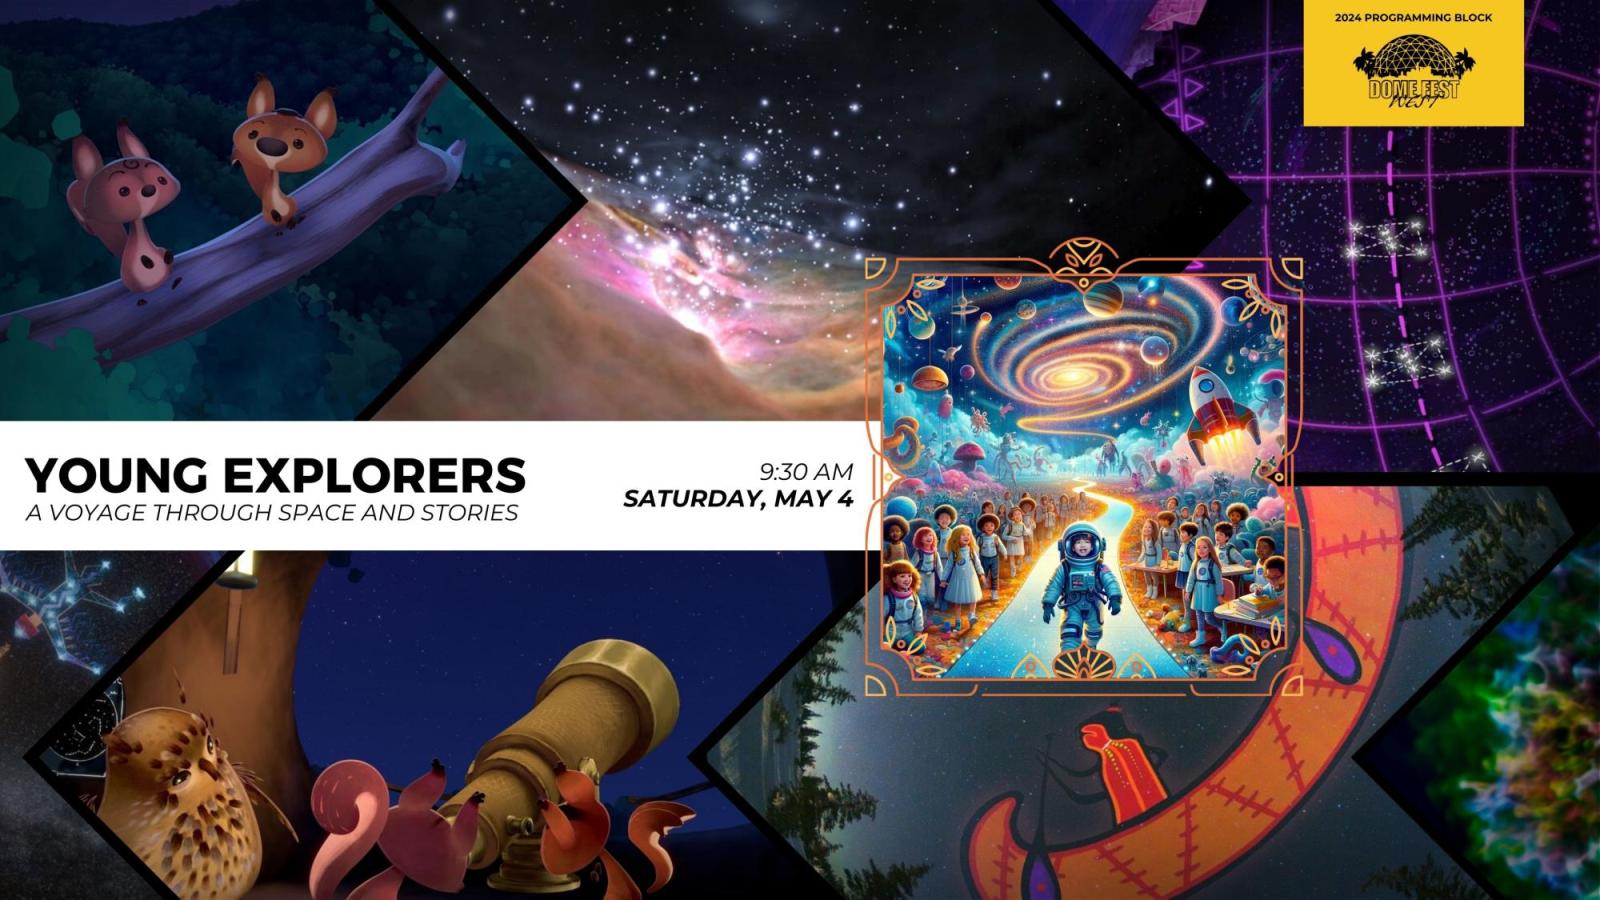 Young Explorers text with Dome Fest West logo and 8 still images from the films